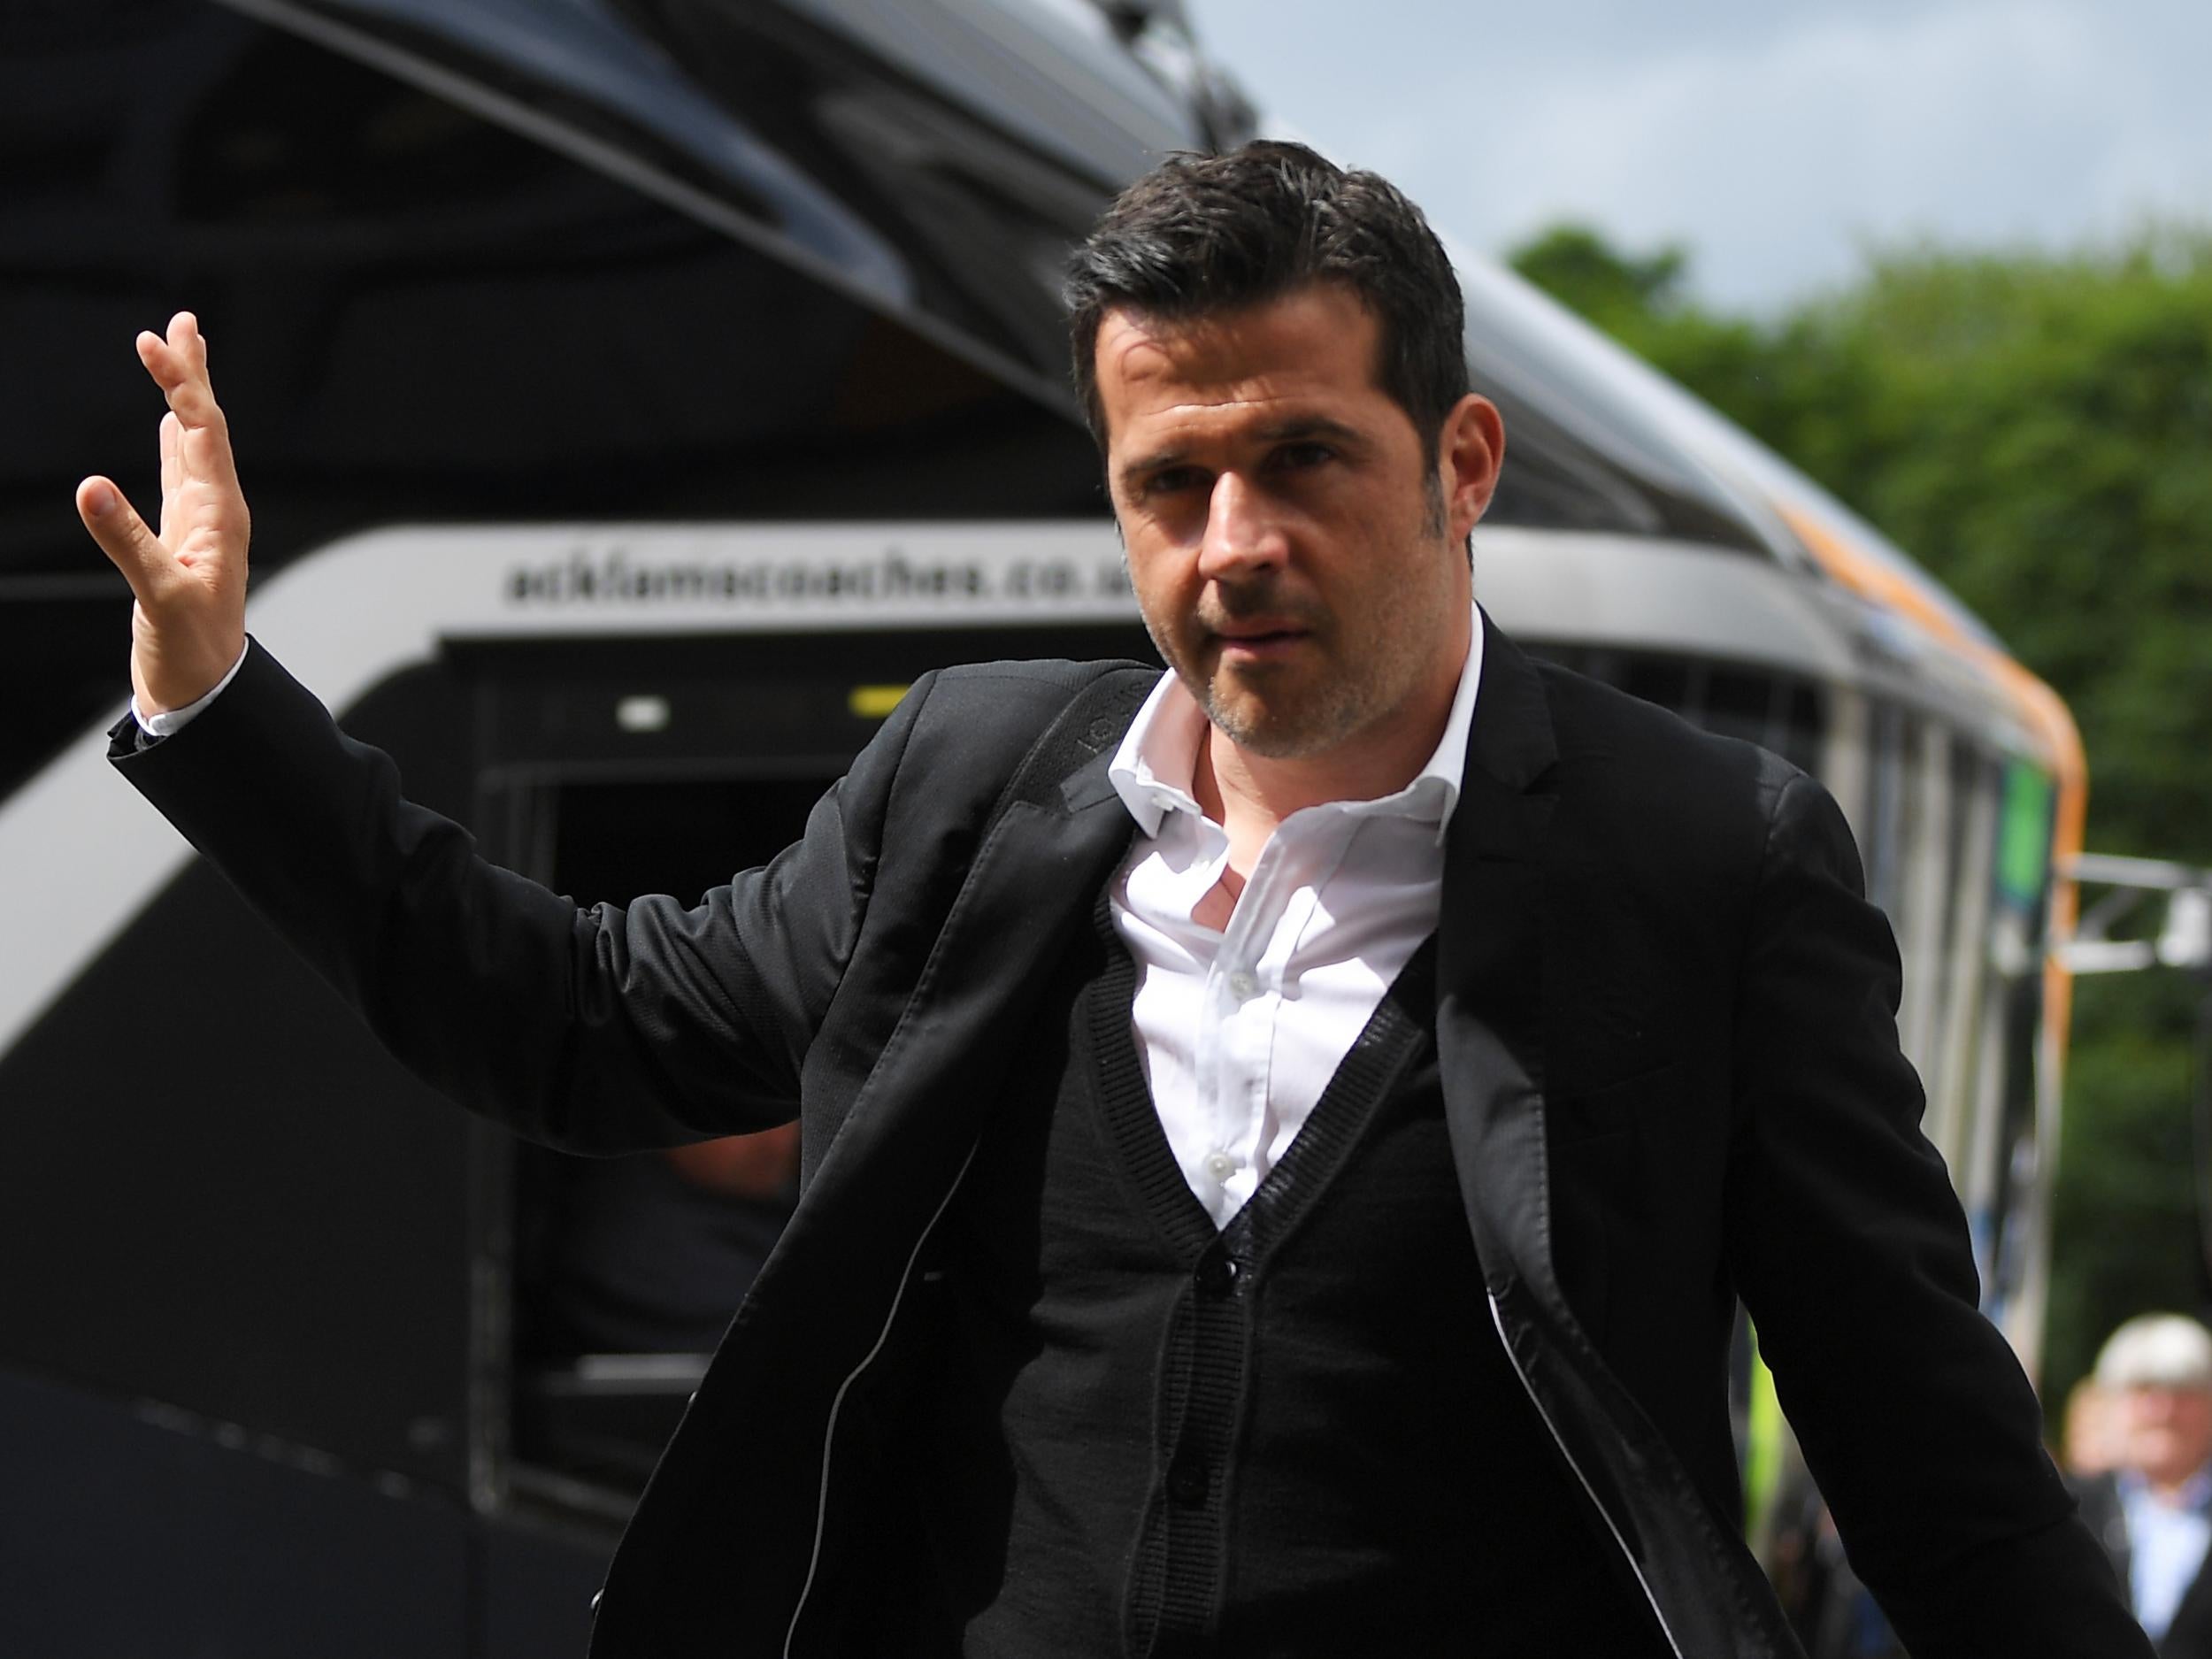 Marco Silva is one of the Premier League's hottest properties - so why won't clubs pay more to get him?